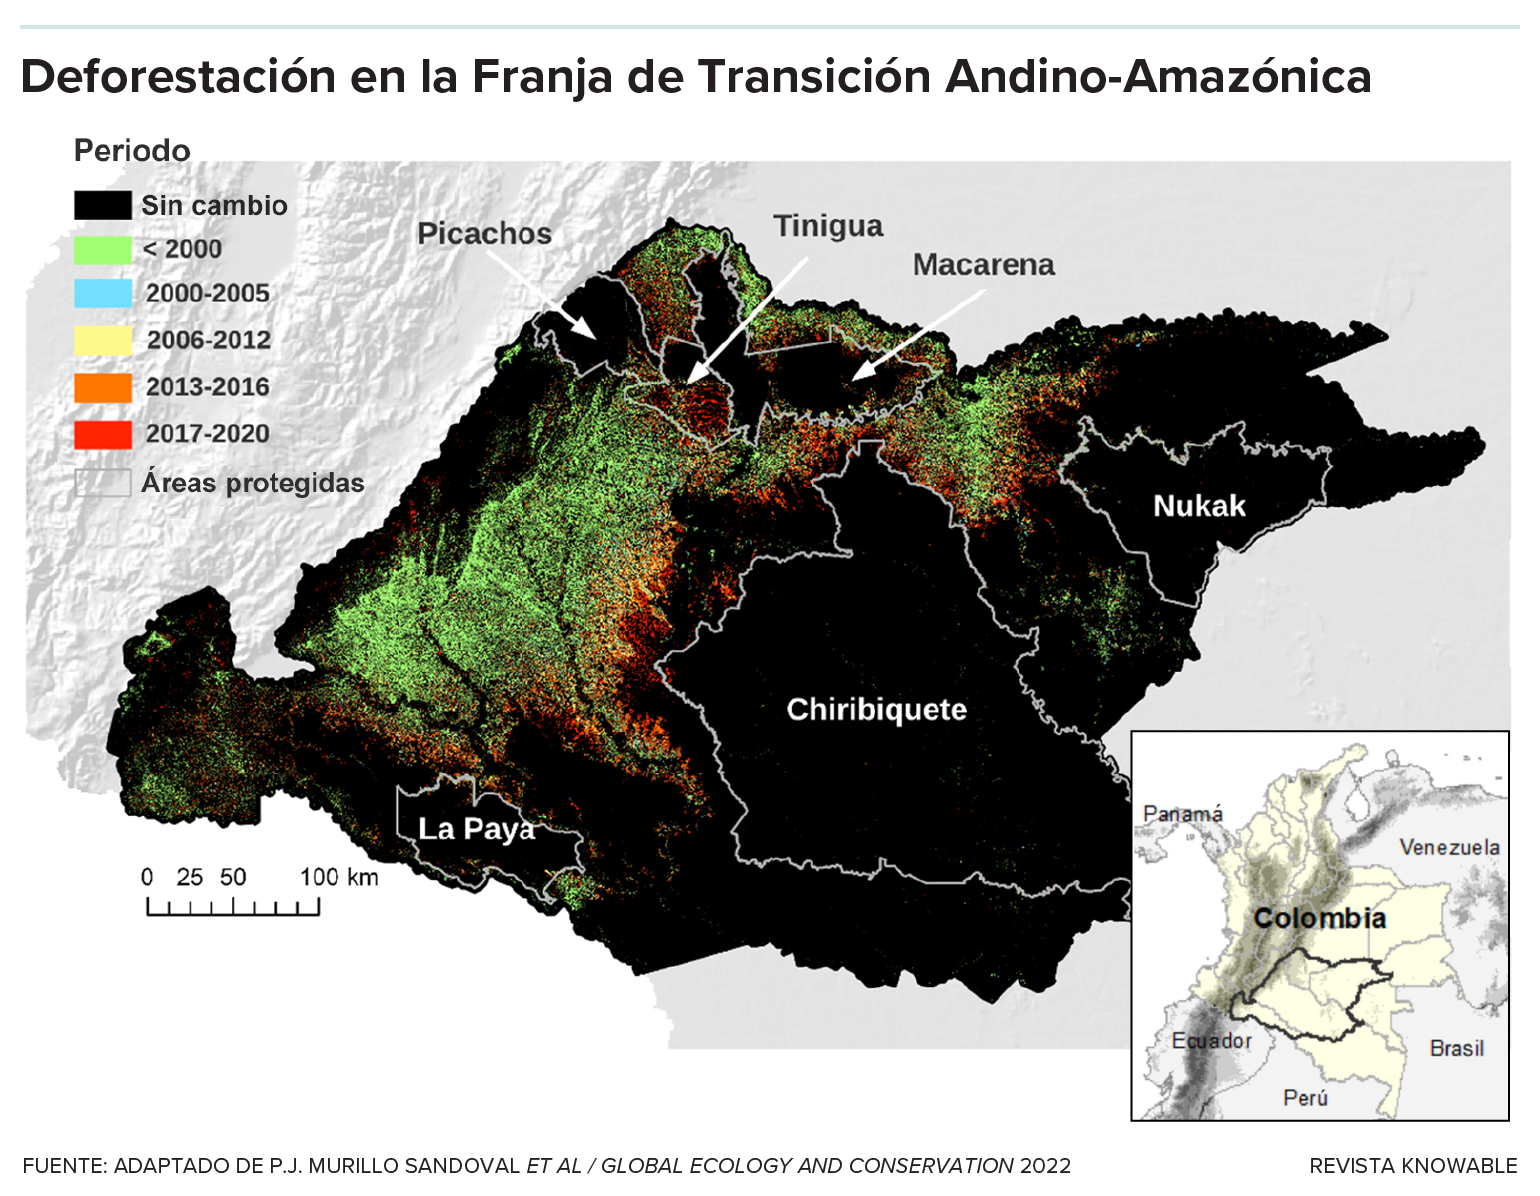 g-deforestation-andes-amazon-kee (1)